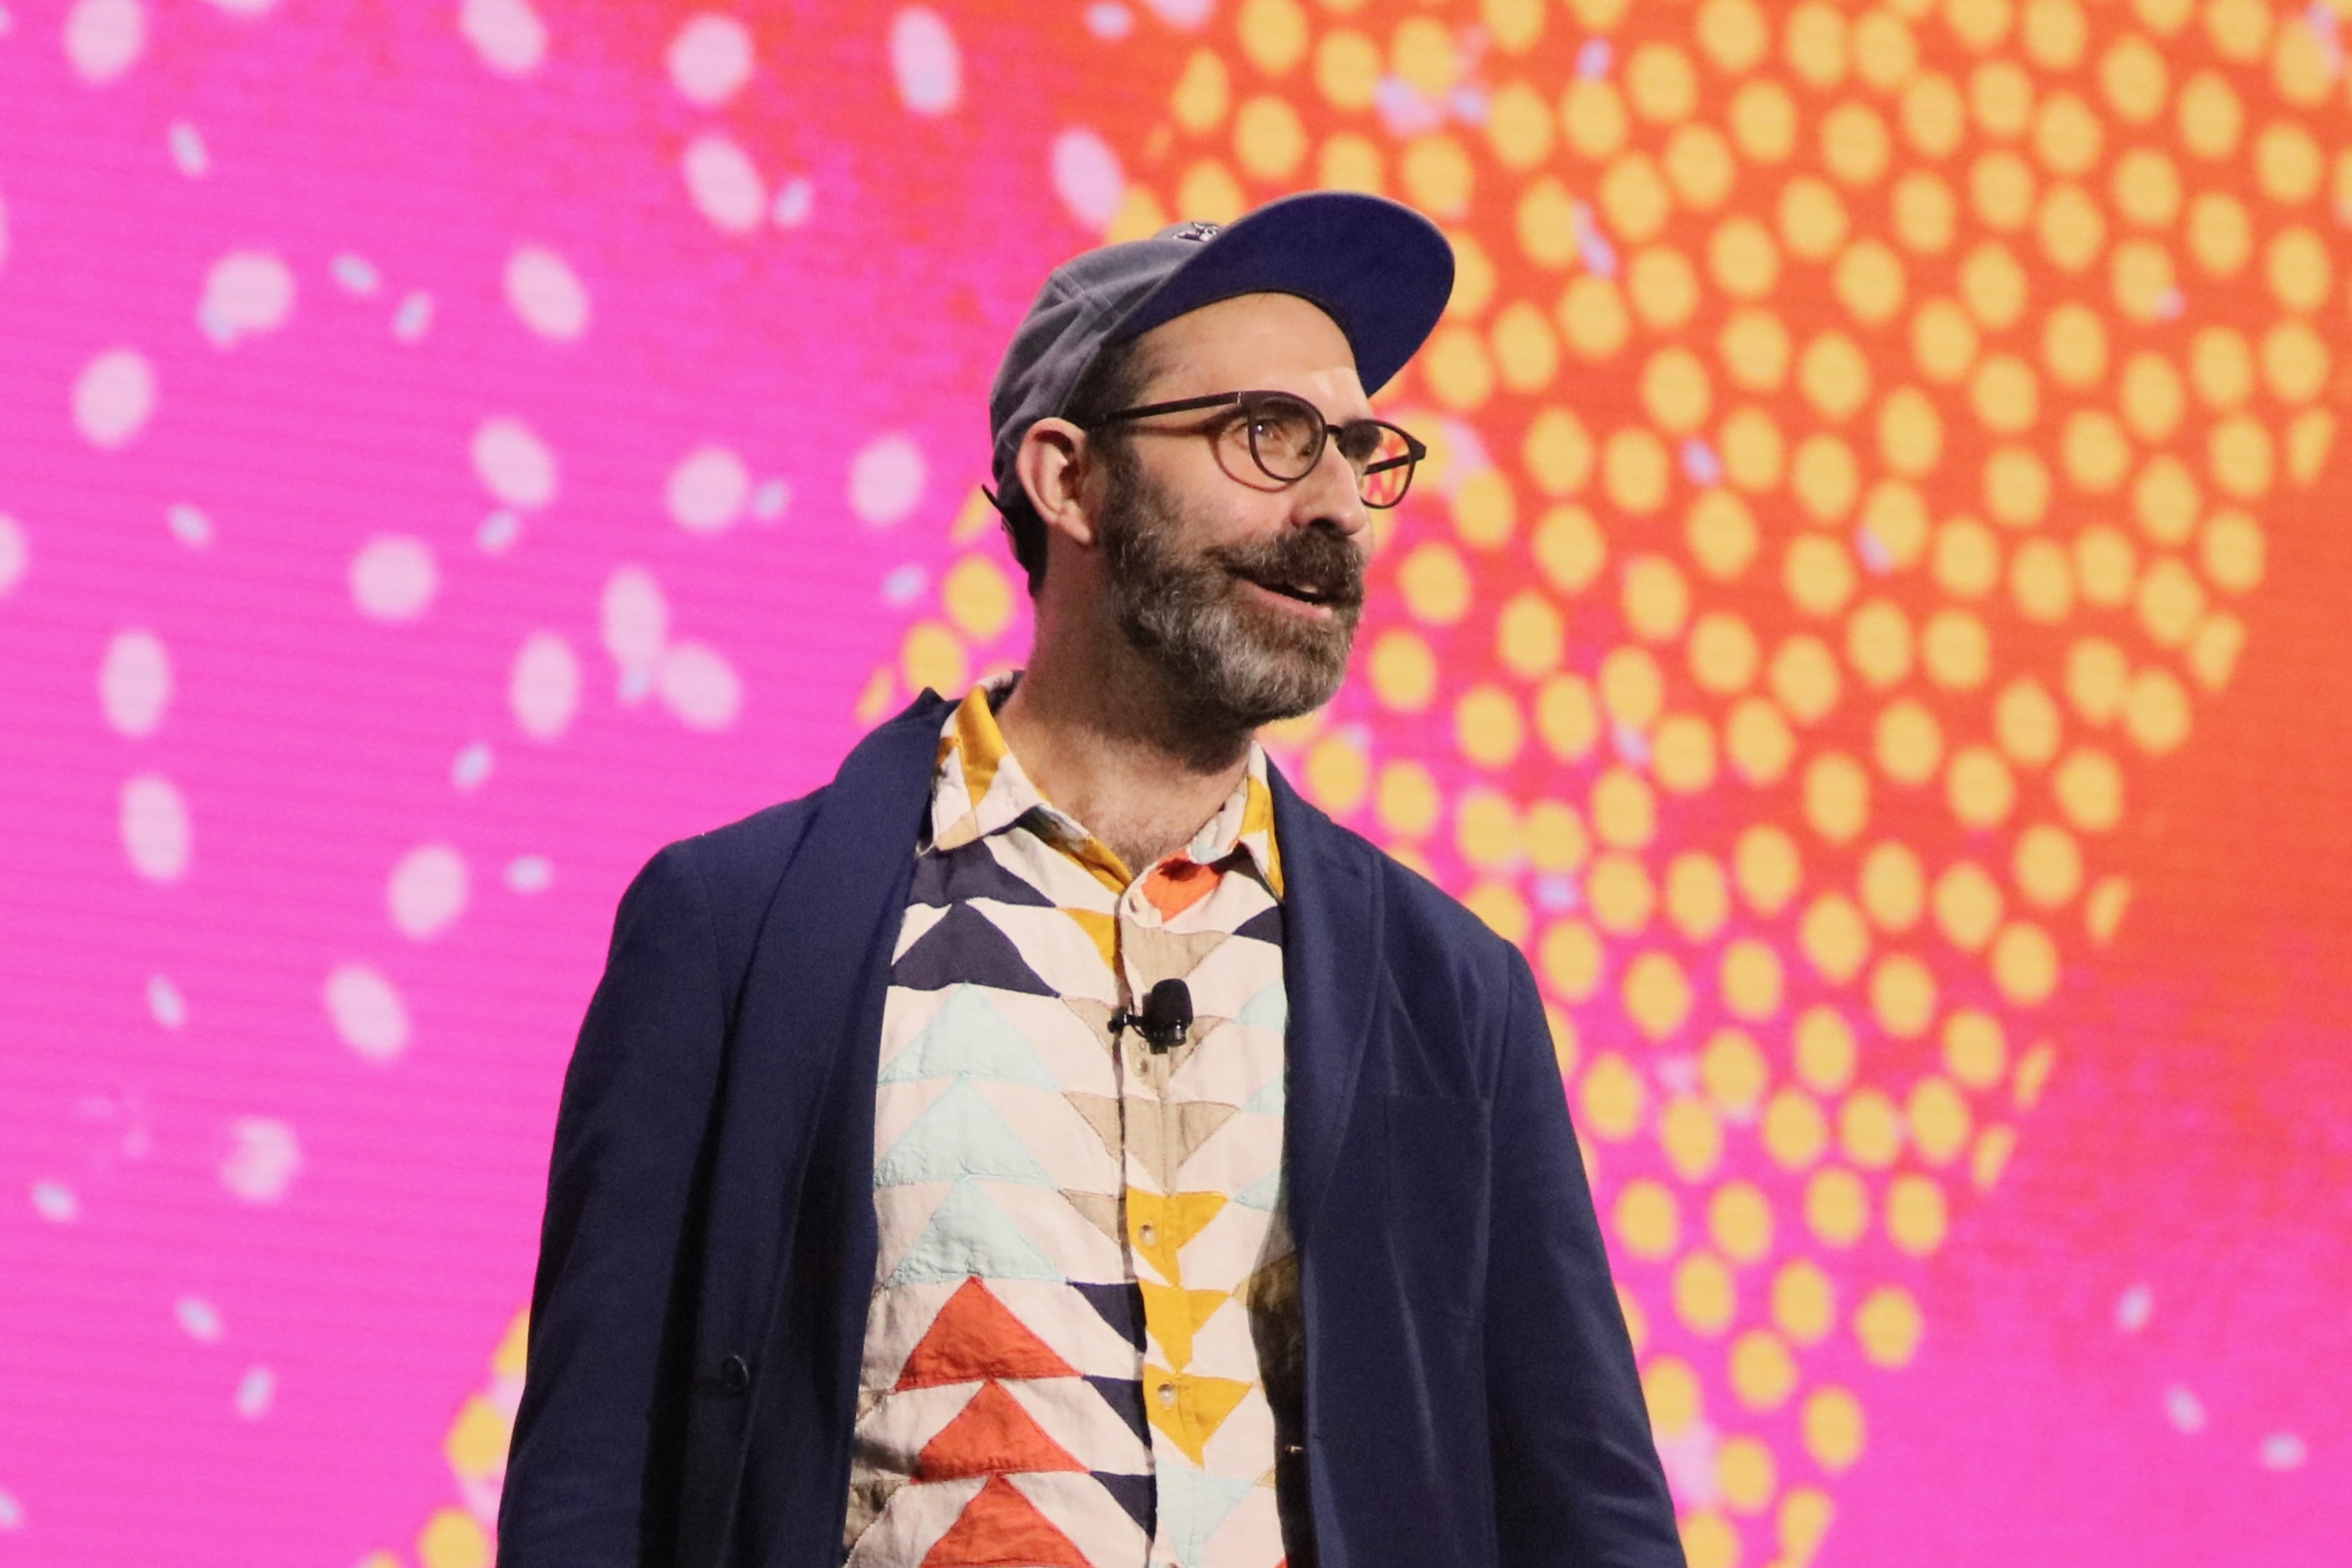 A man with a beard, glasses and ball cap looks into the distance with a pink and orange artful backdrop behind him